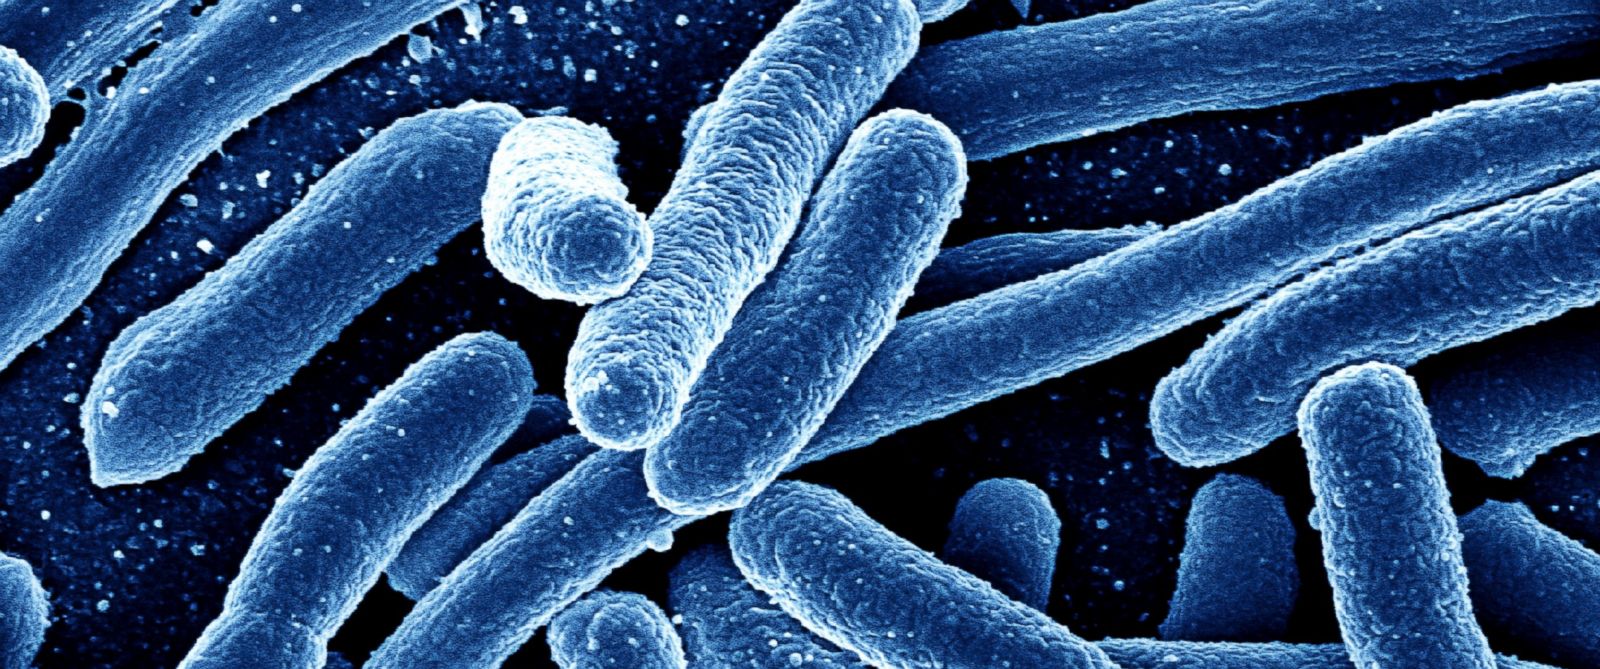 Image: Health authorities warn next superbug pandemic will kill “millions” … and nations aren’t doing anything to stop it